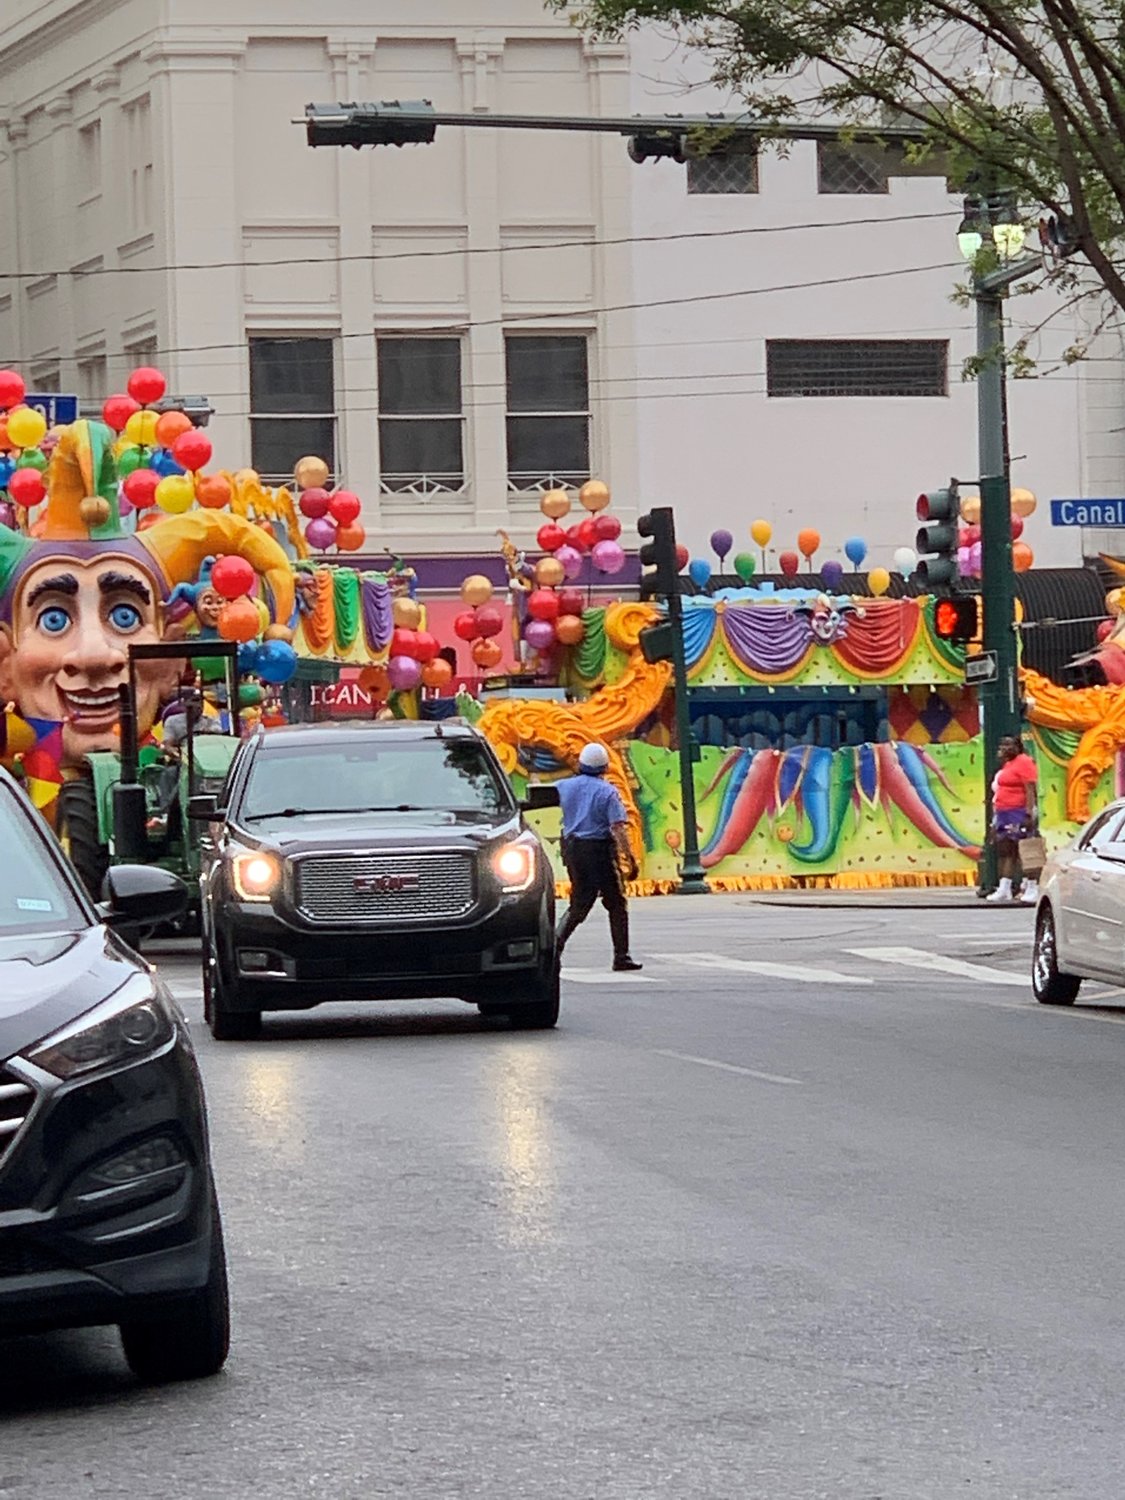 Transportation to our evening reception at Mardi Gras World was done in style -- riding Mardi Gras floats and throwing beads to everyone we passed! (Photo by America's Newspapers)